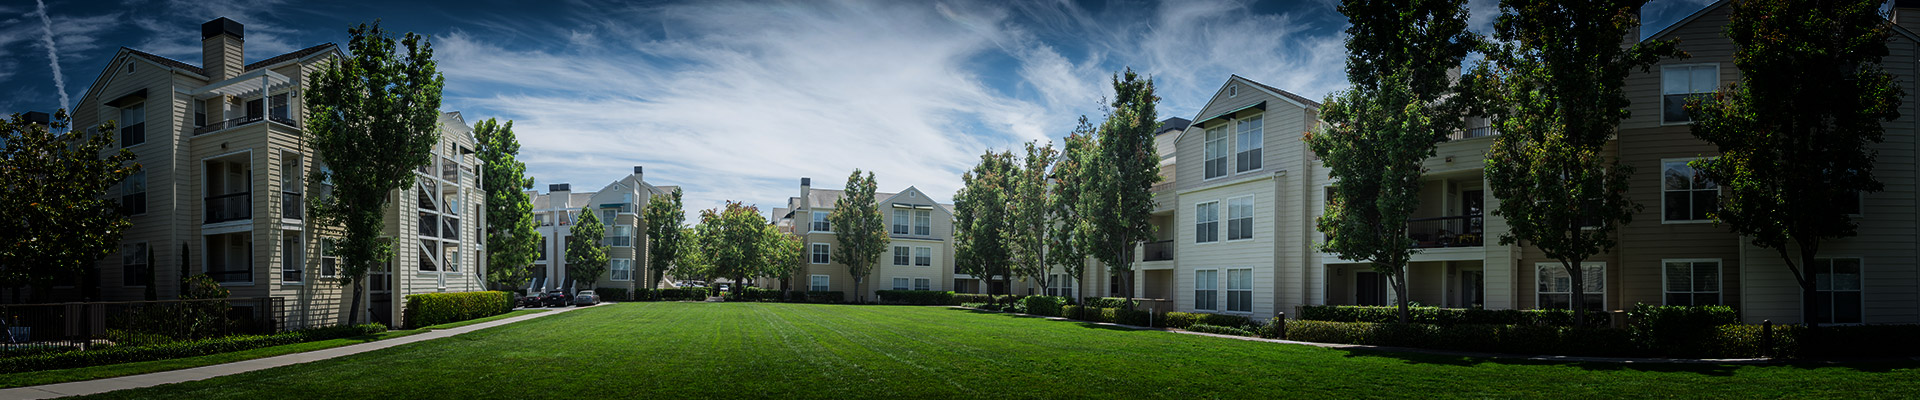 Panorama view apartment building complex with grassy backyard